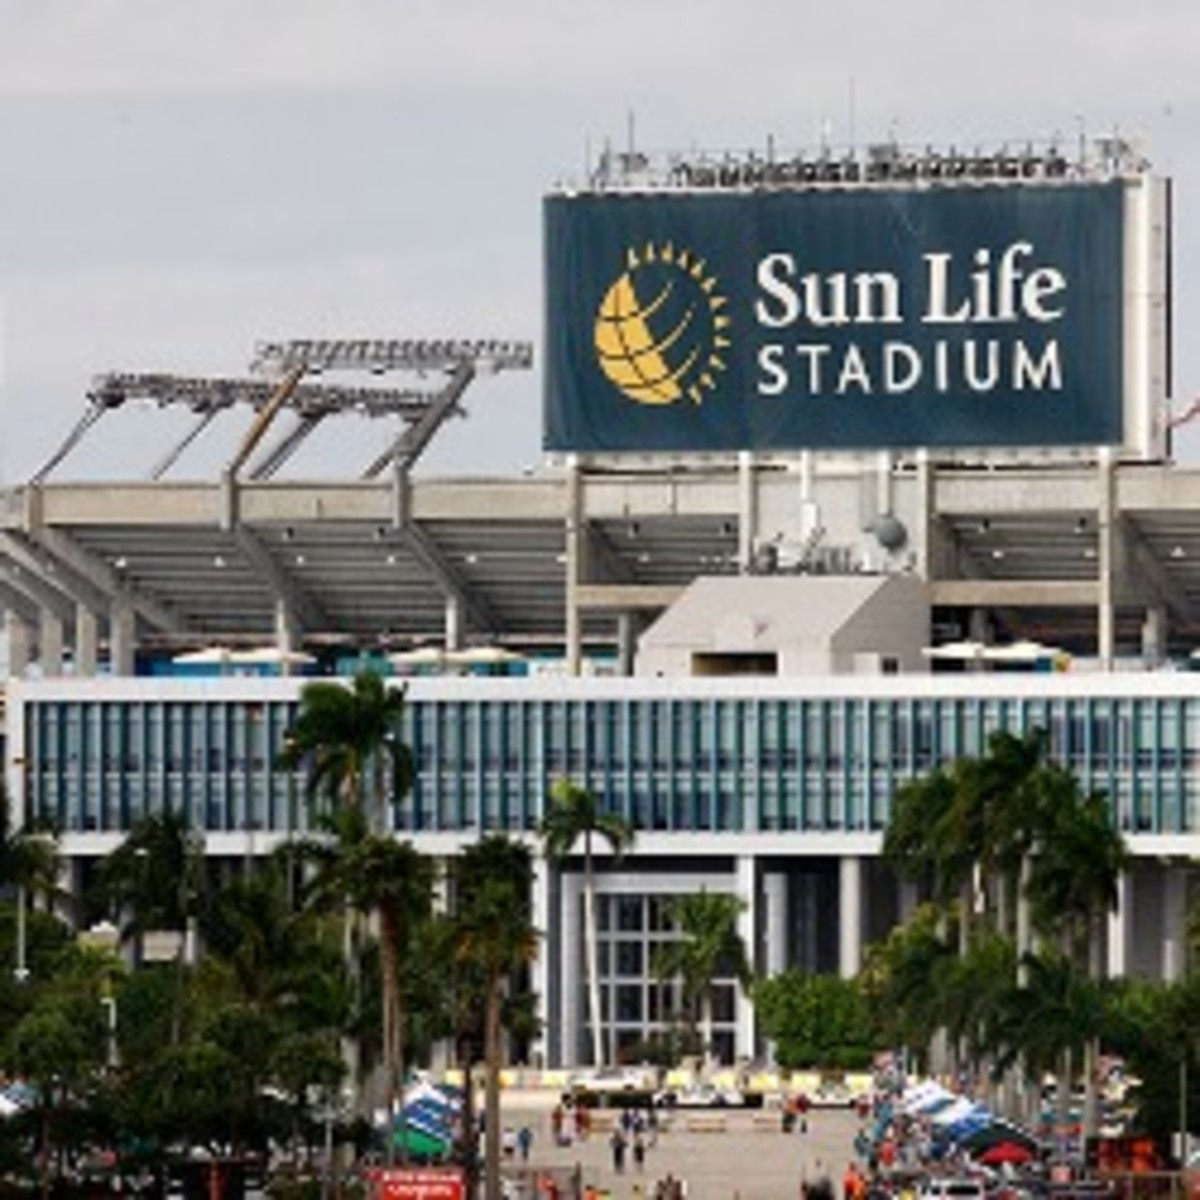 Sun Life Stadium could be passed over for future Super Bowls if the stadium isn't renovated. (Wilfredo Lee/AP